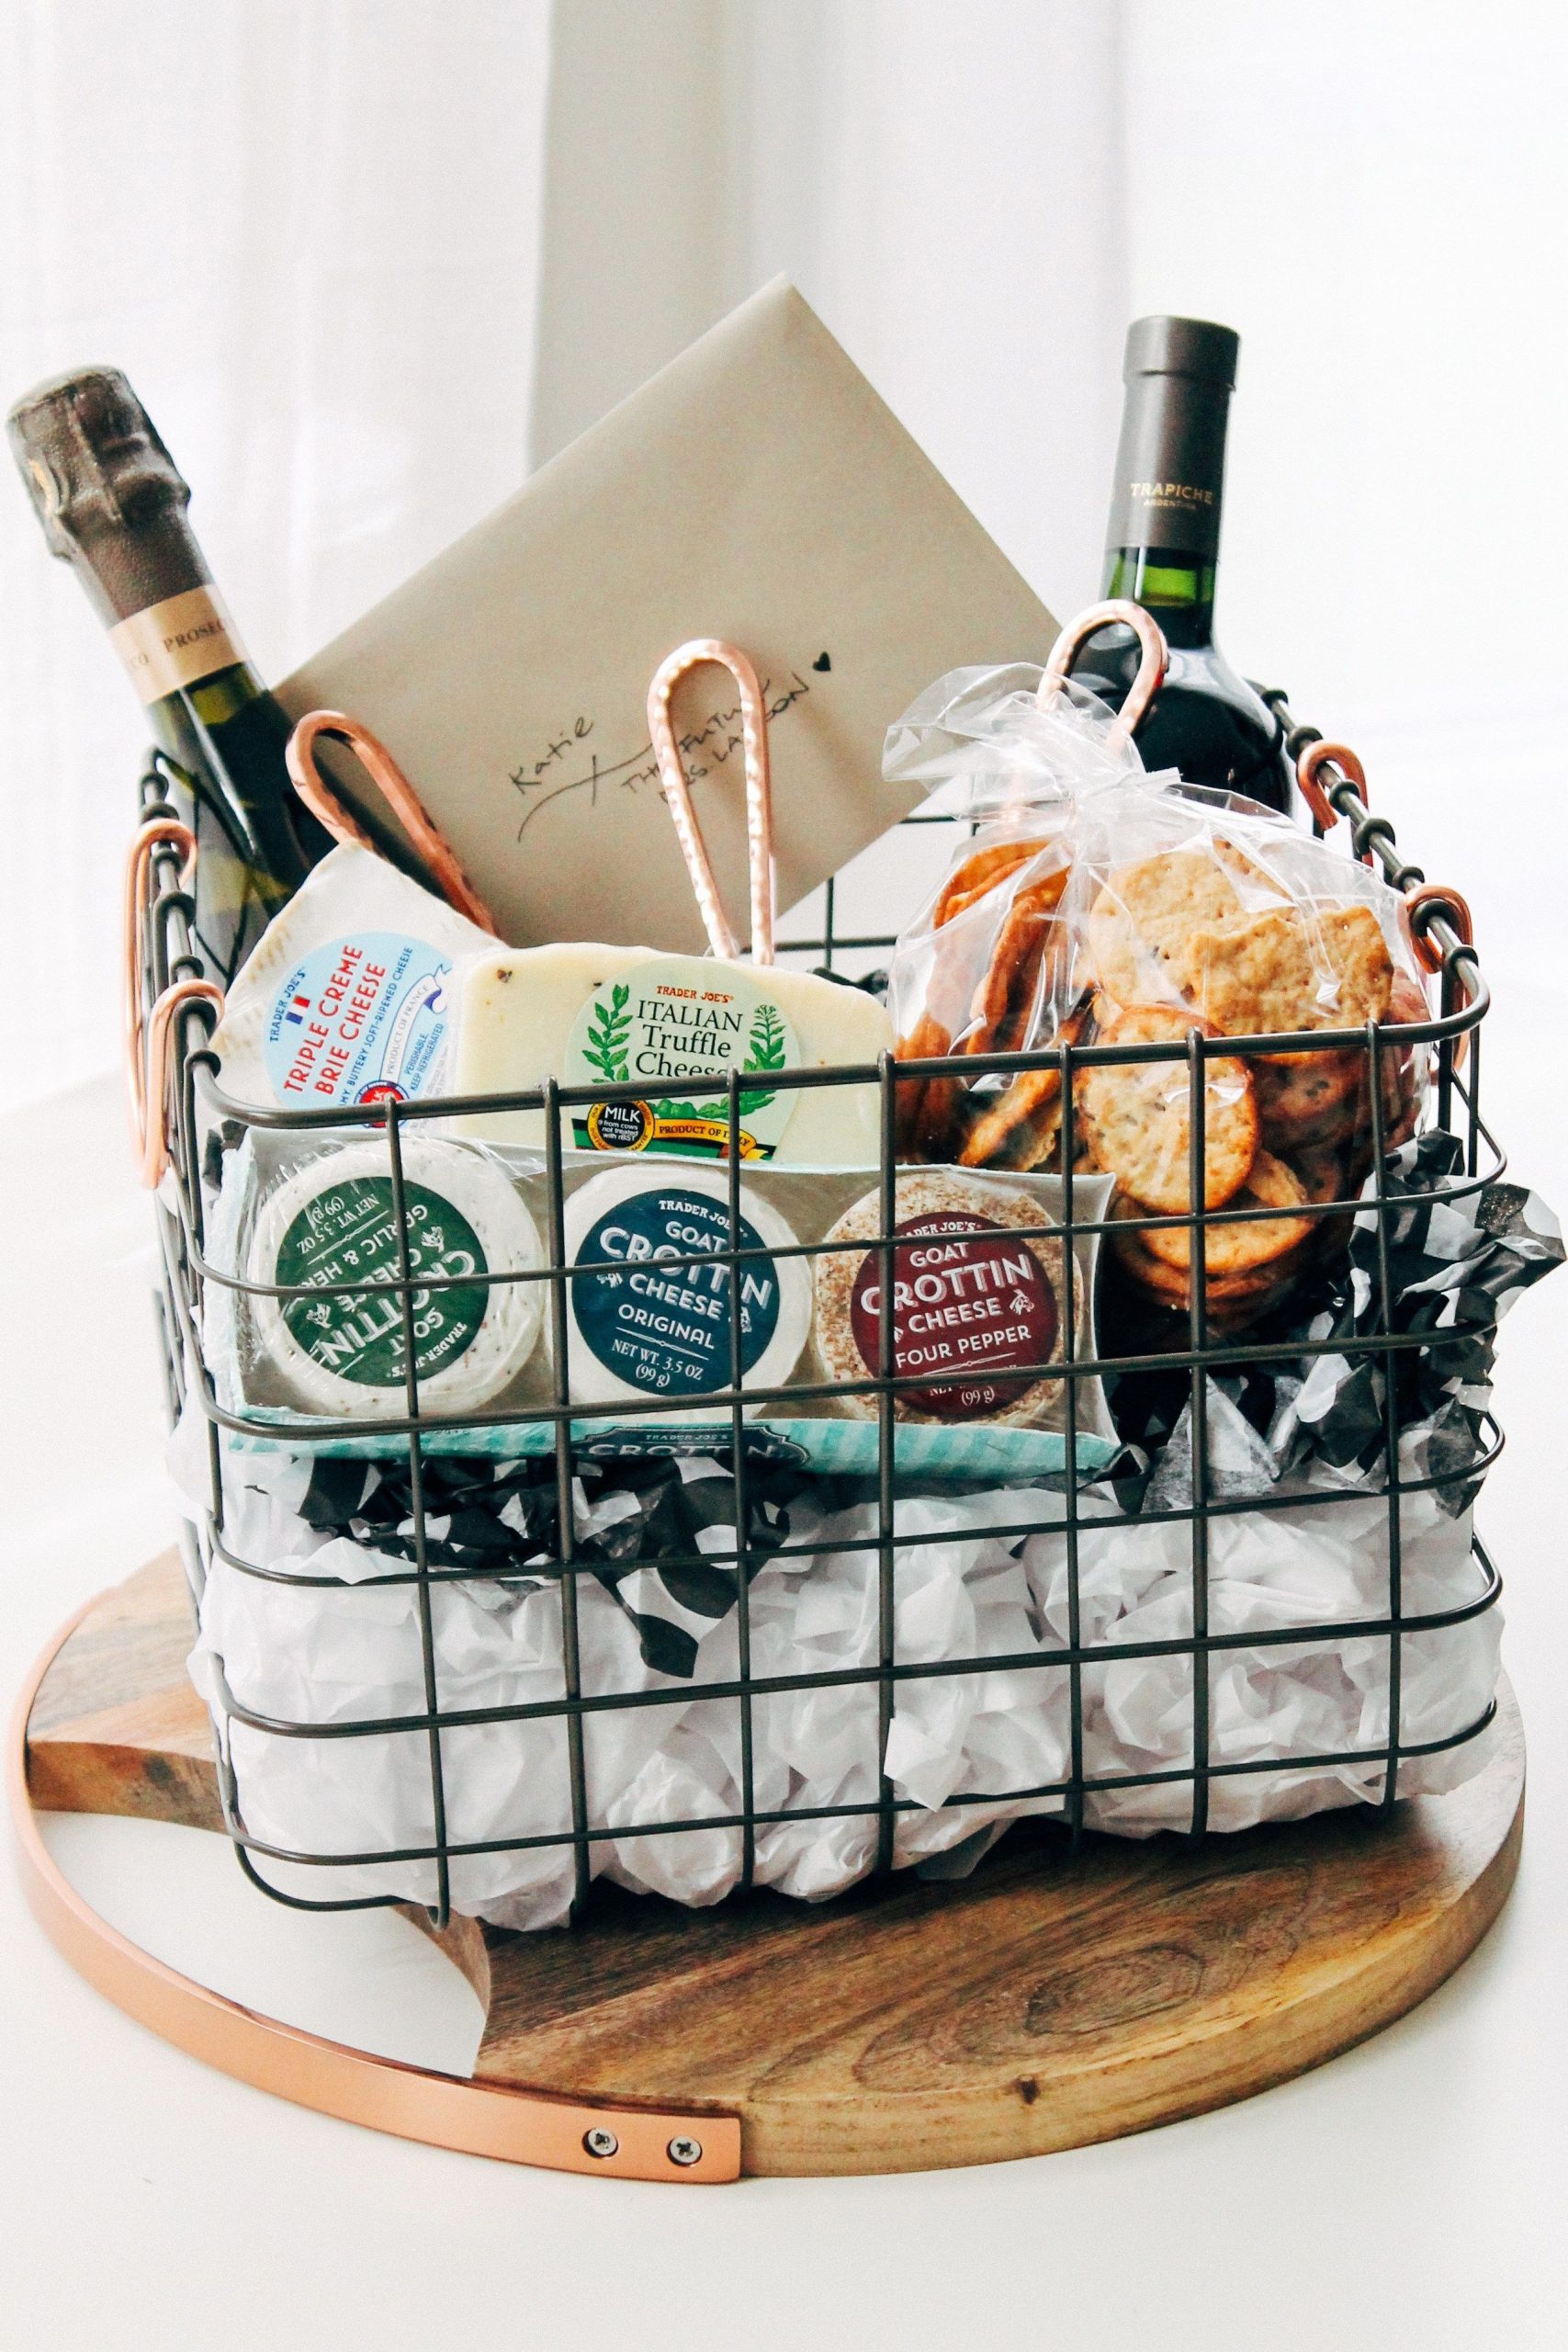 Small Holiday Gift Basket Ideas
 the ultimate cheese t basket playswellwithbutter